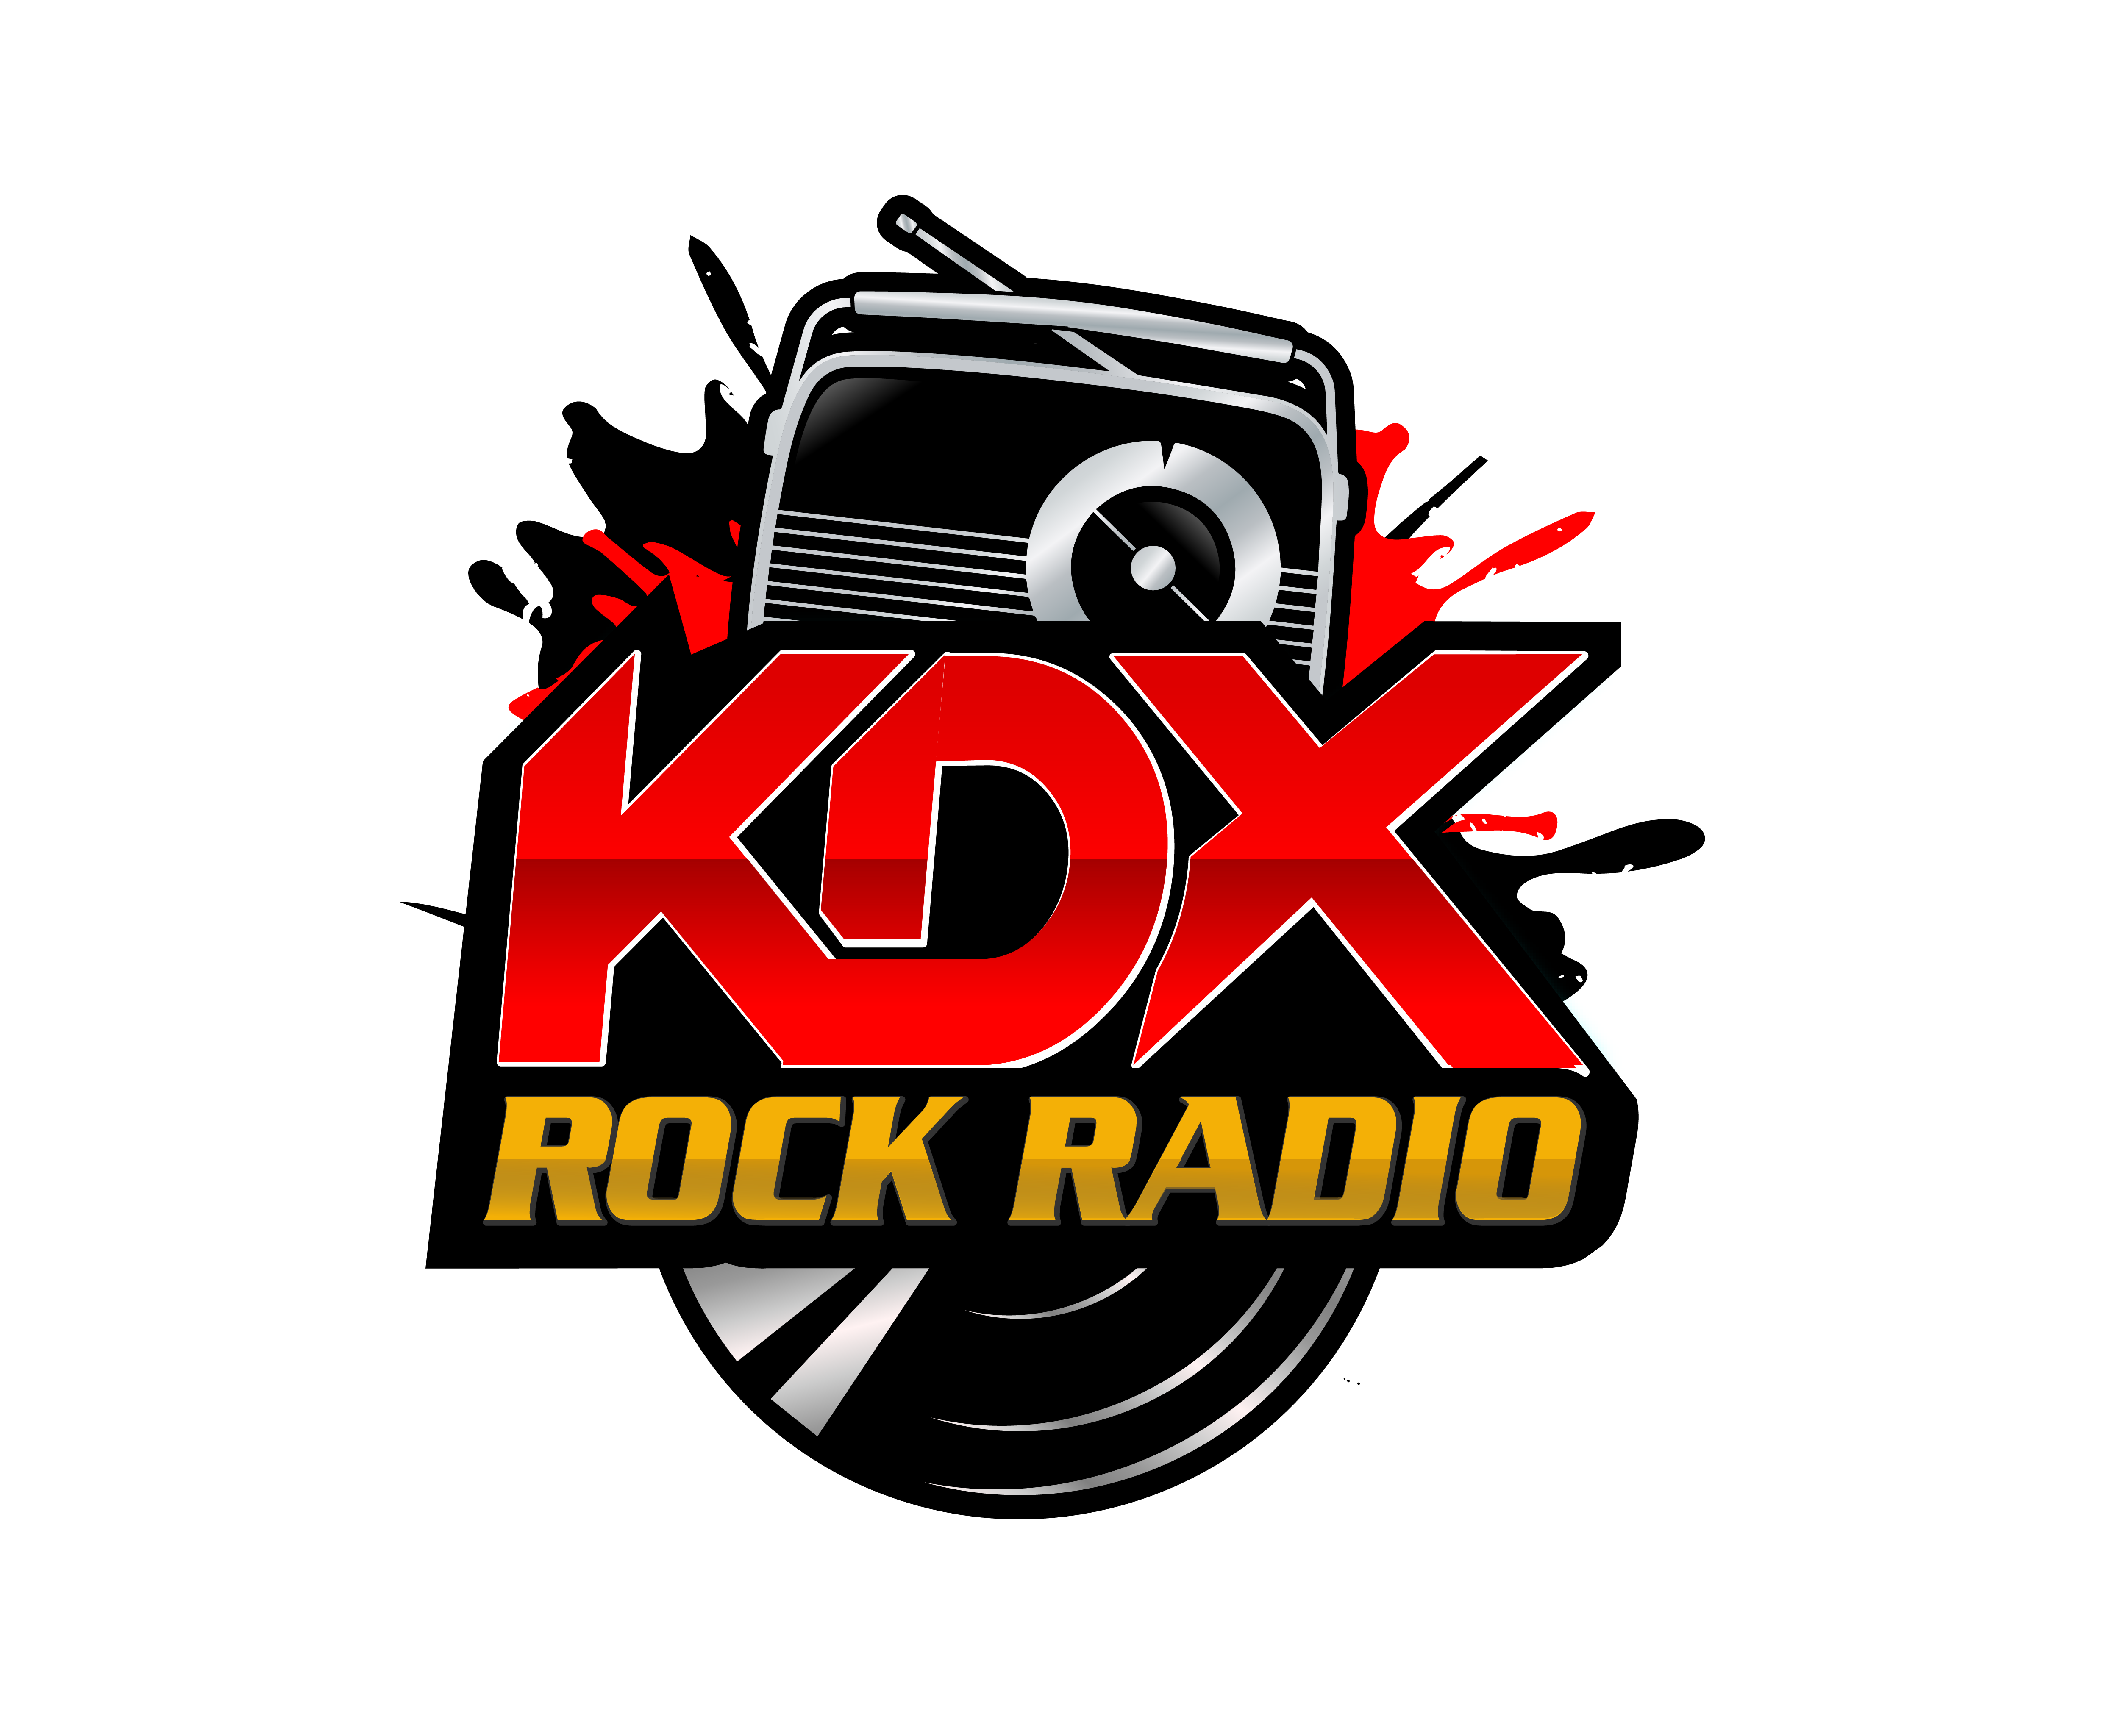 Art for NEW ROCK OR CLASSIC ROCK by KDX MAIN PRODUCED SWEEPER